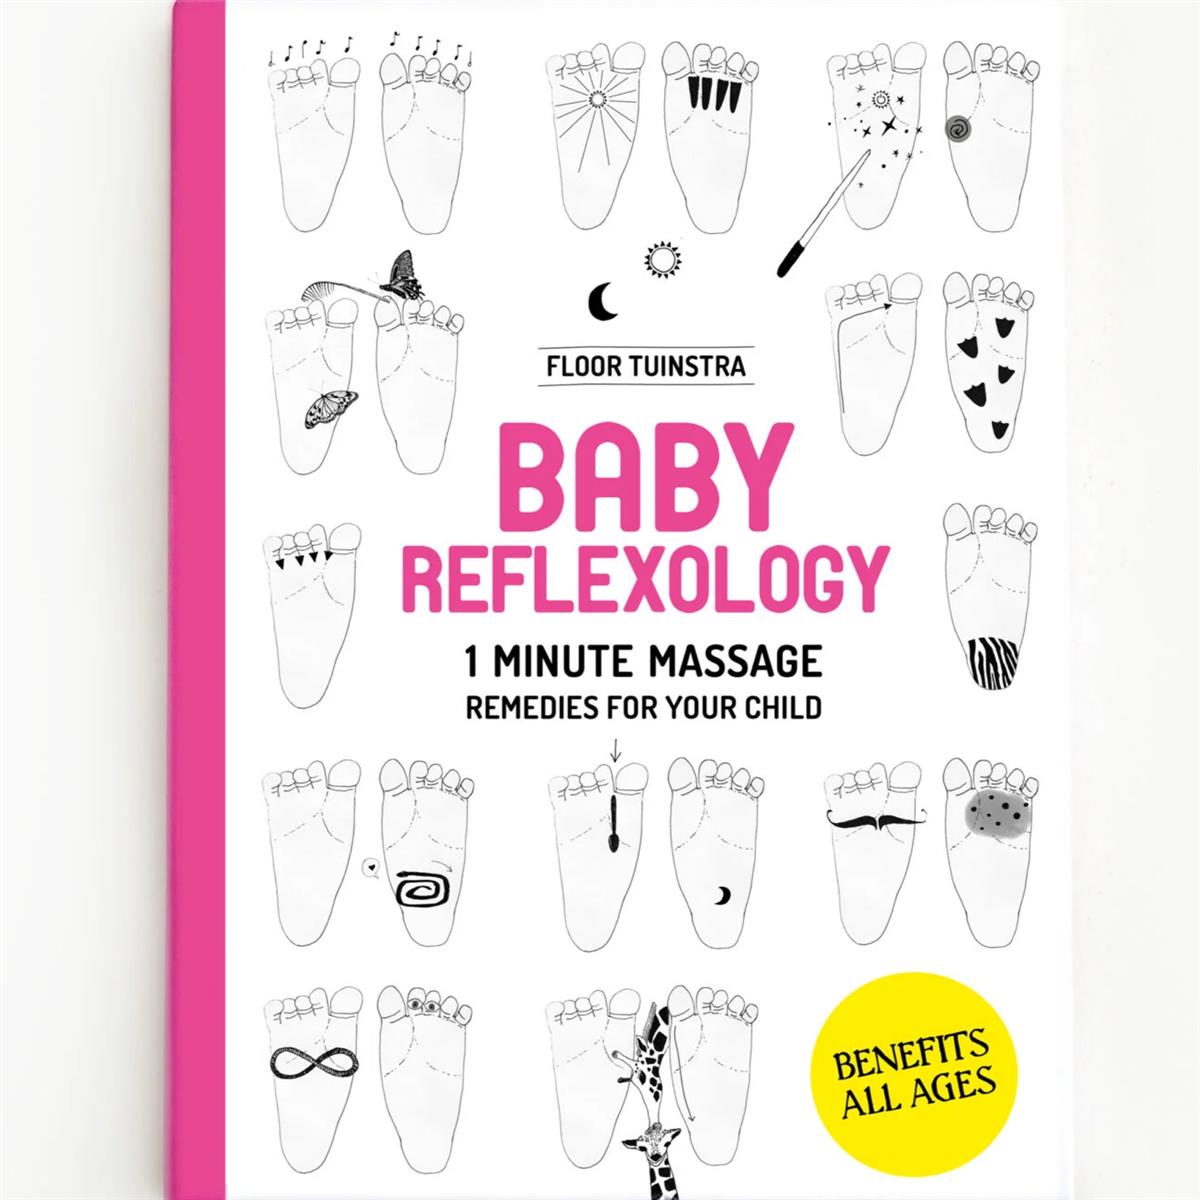 Book Baby Reflexology - 1 minute massage remedies for your child